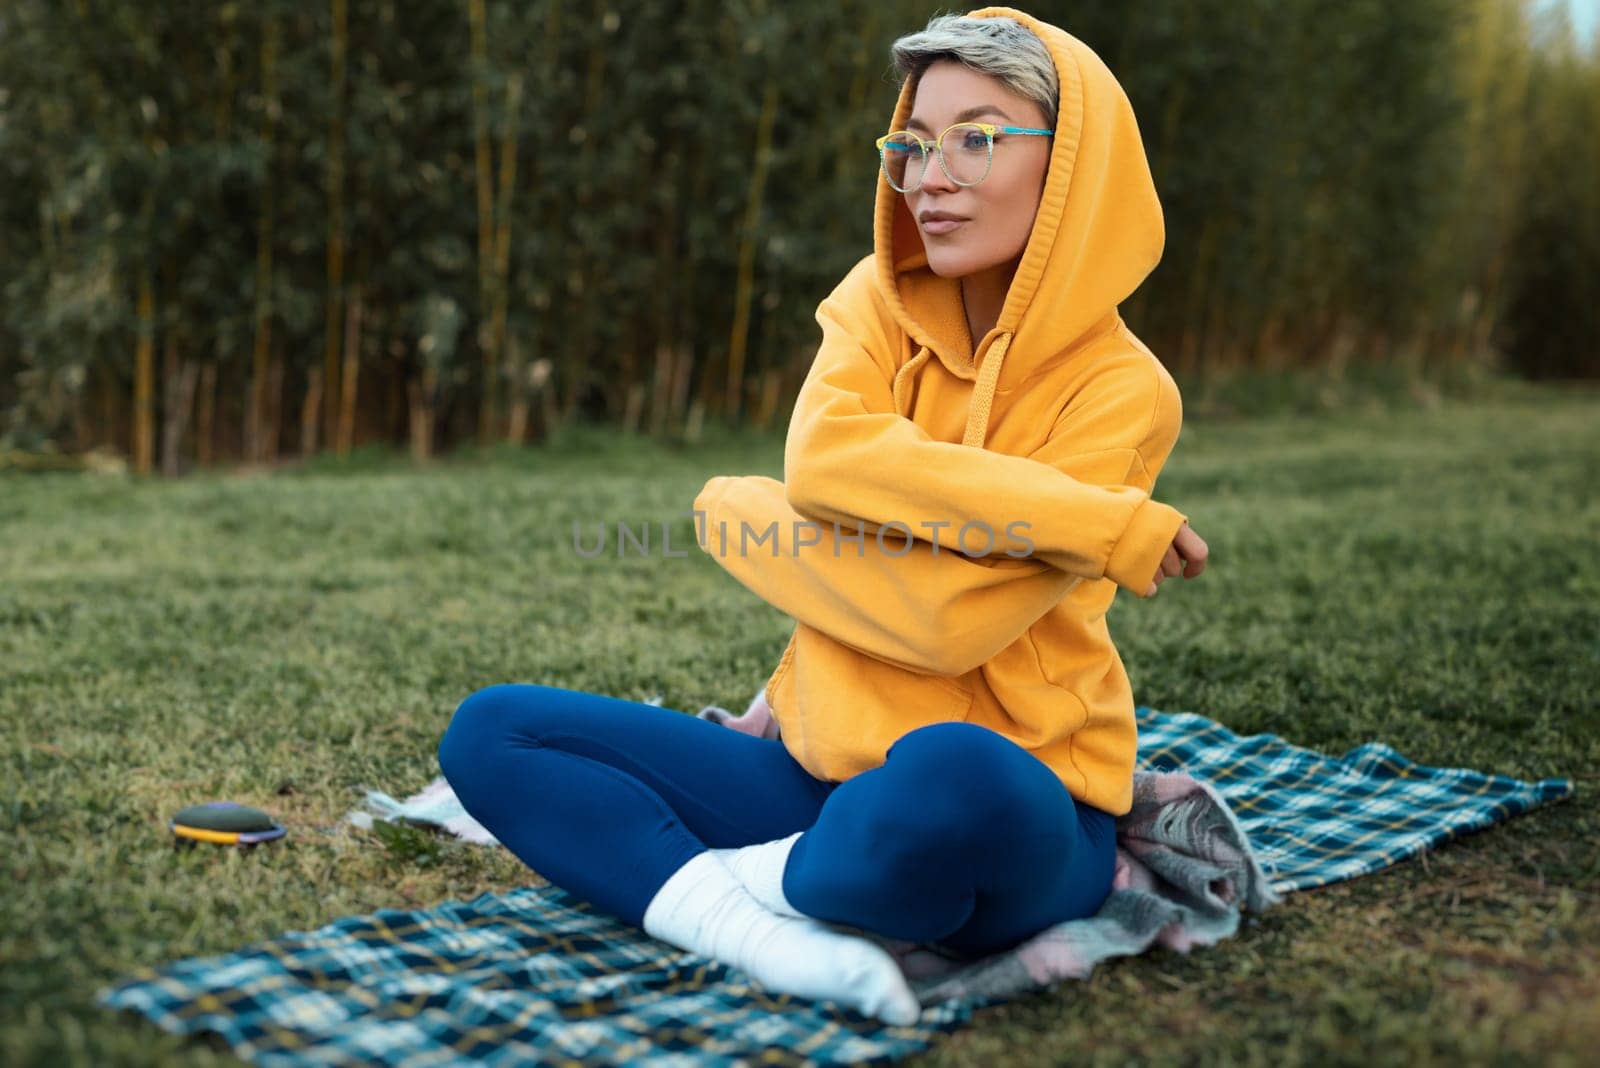 cute girl with glasses in an orange hoodie is sitting in a park in nature expressing kind emotions by Rotozey